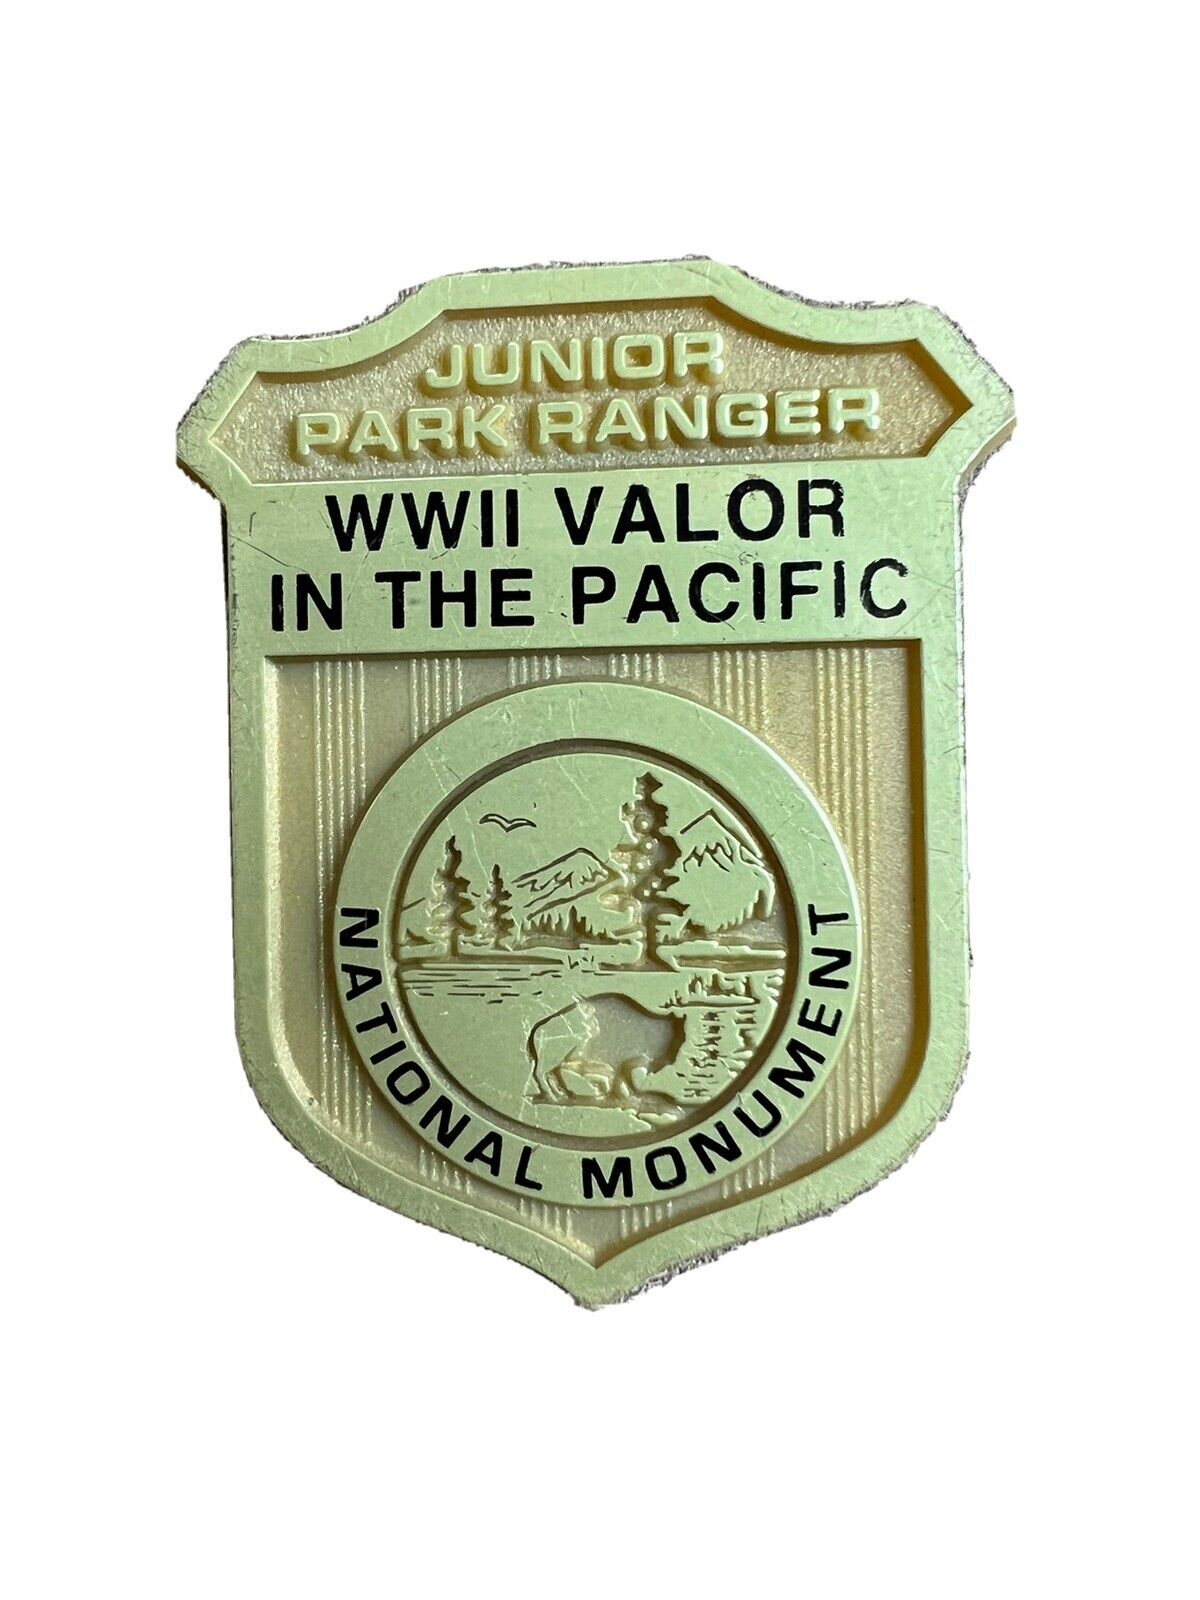 Wwii Valor In The Pacific National Monument Nps Junior Ranger Badge